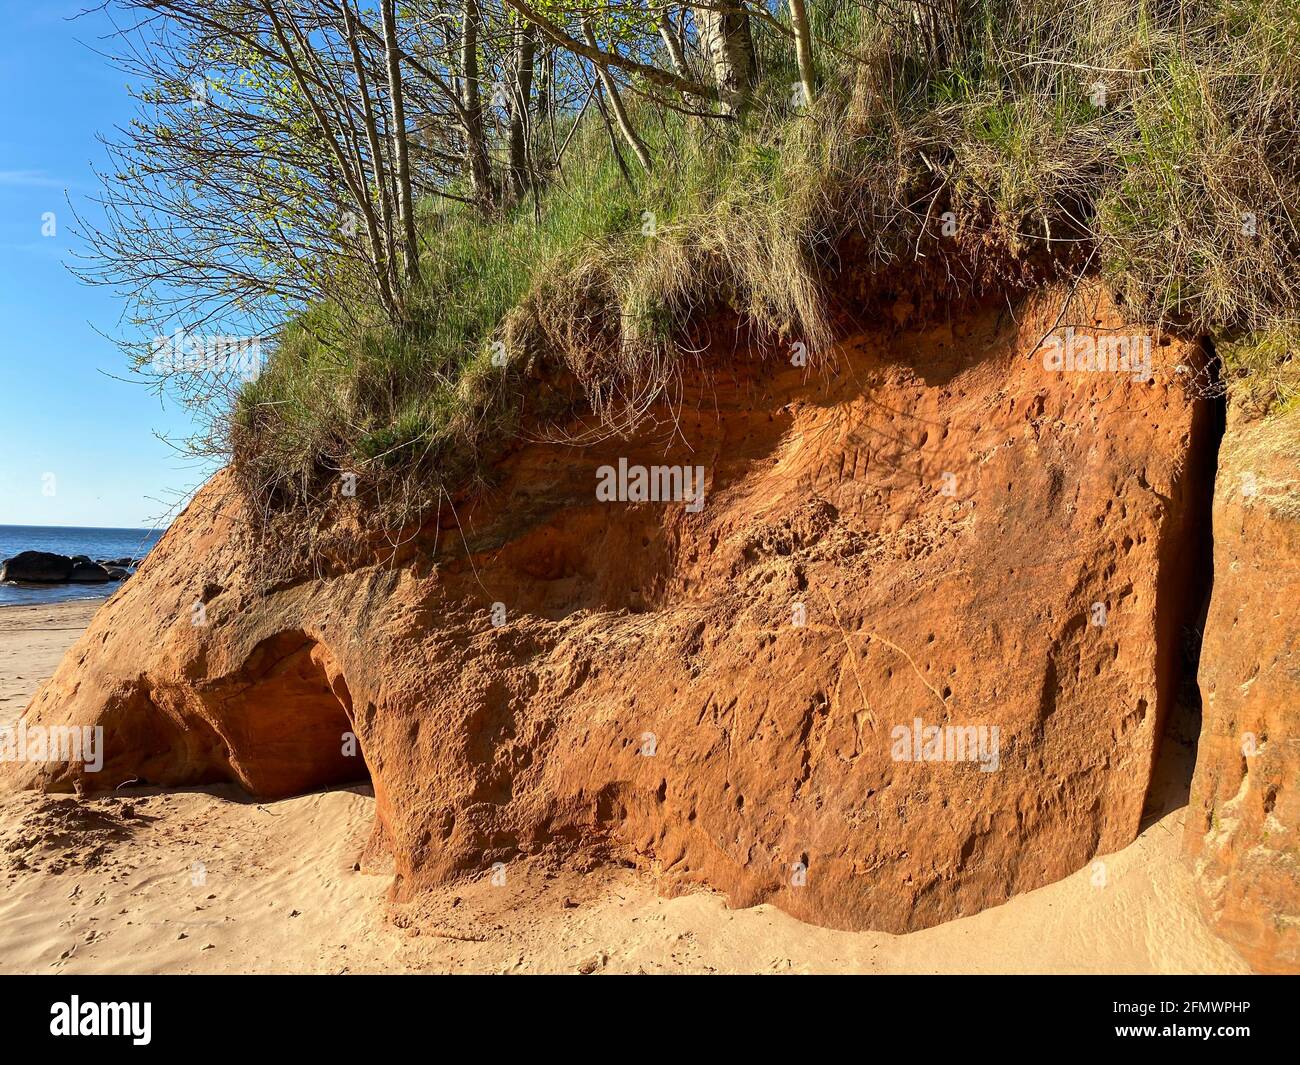 Orange Sandstone rock cliff by the sea on which grows green grass and trees. Stock Photo